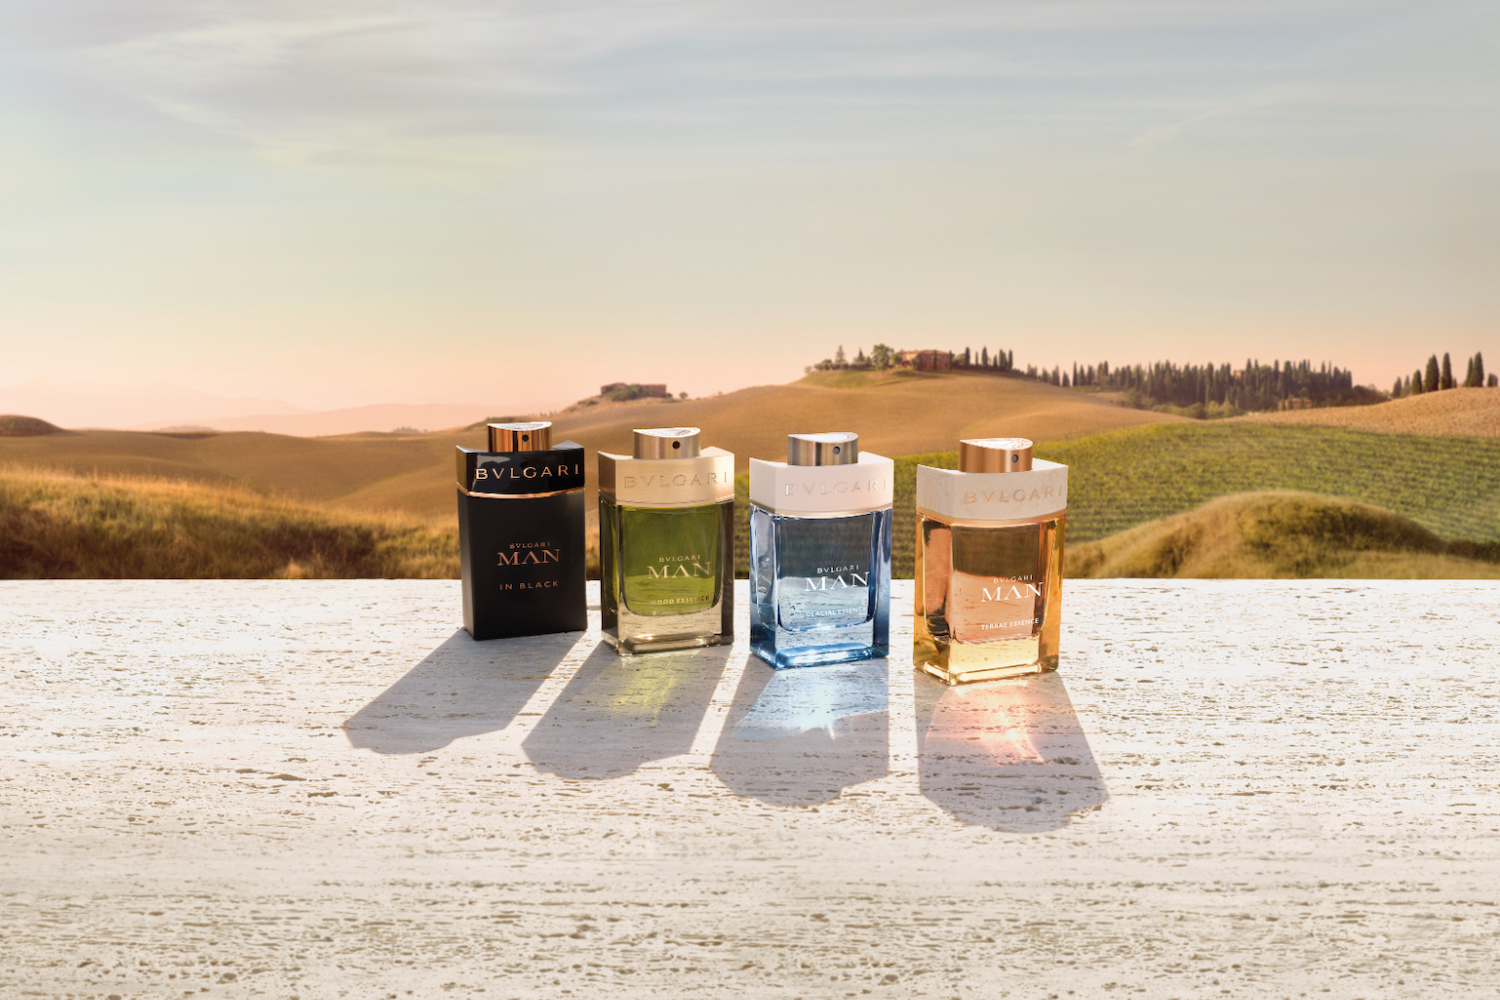 BVLGARI MAN’s Newest Cologne Collection Is The Perfect Gift For Any Man In Your Life